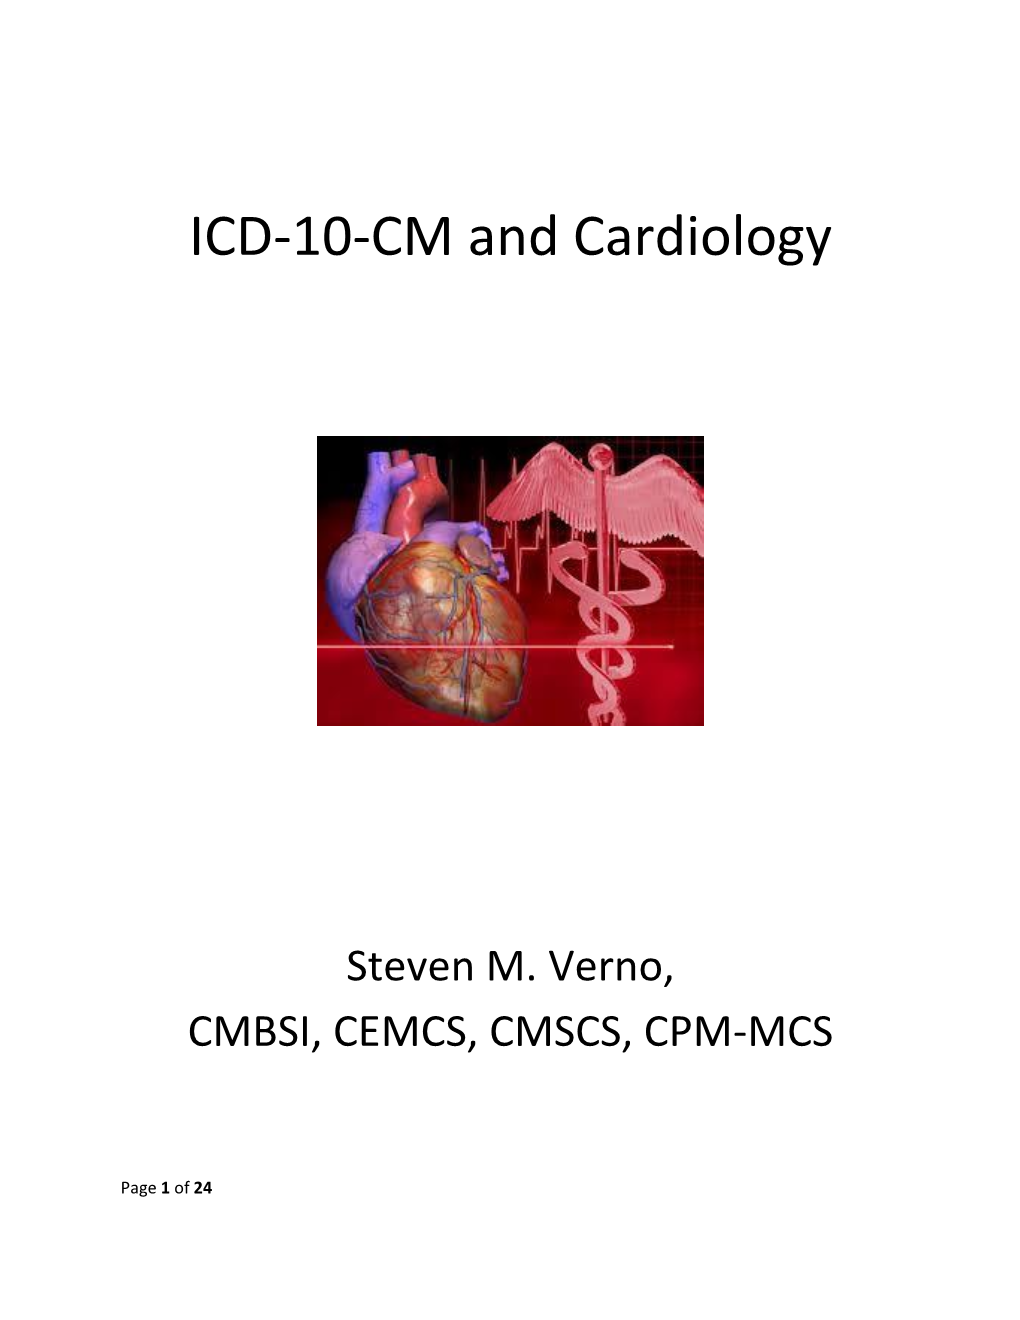 ICD-10 and Cardiology Steven M